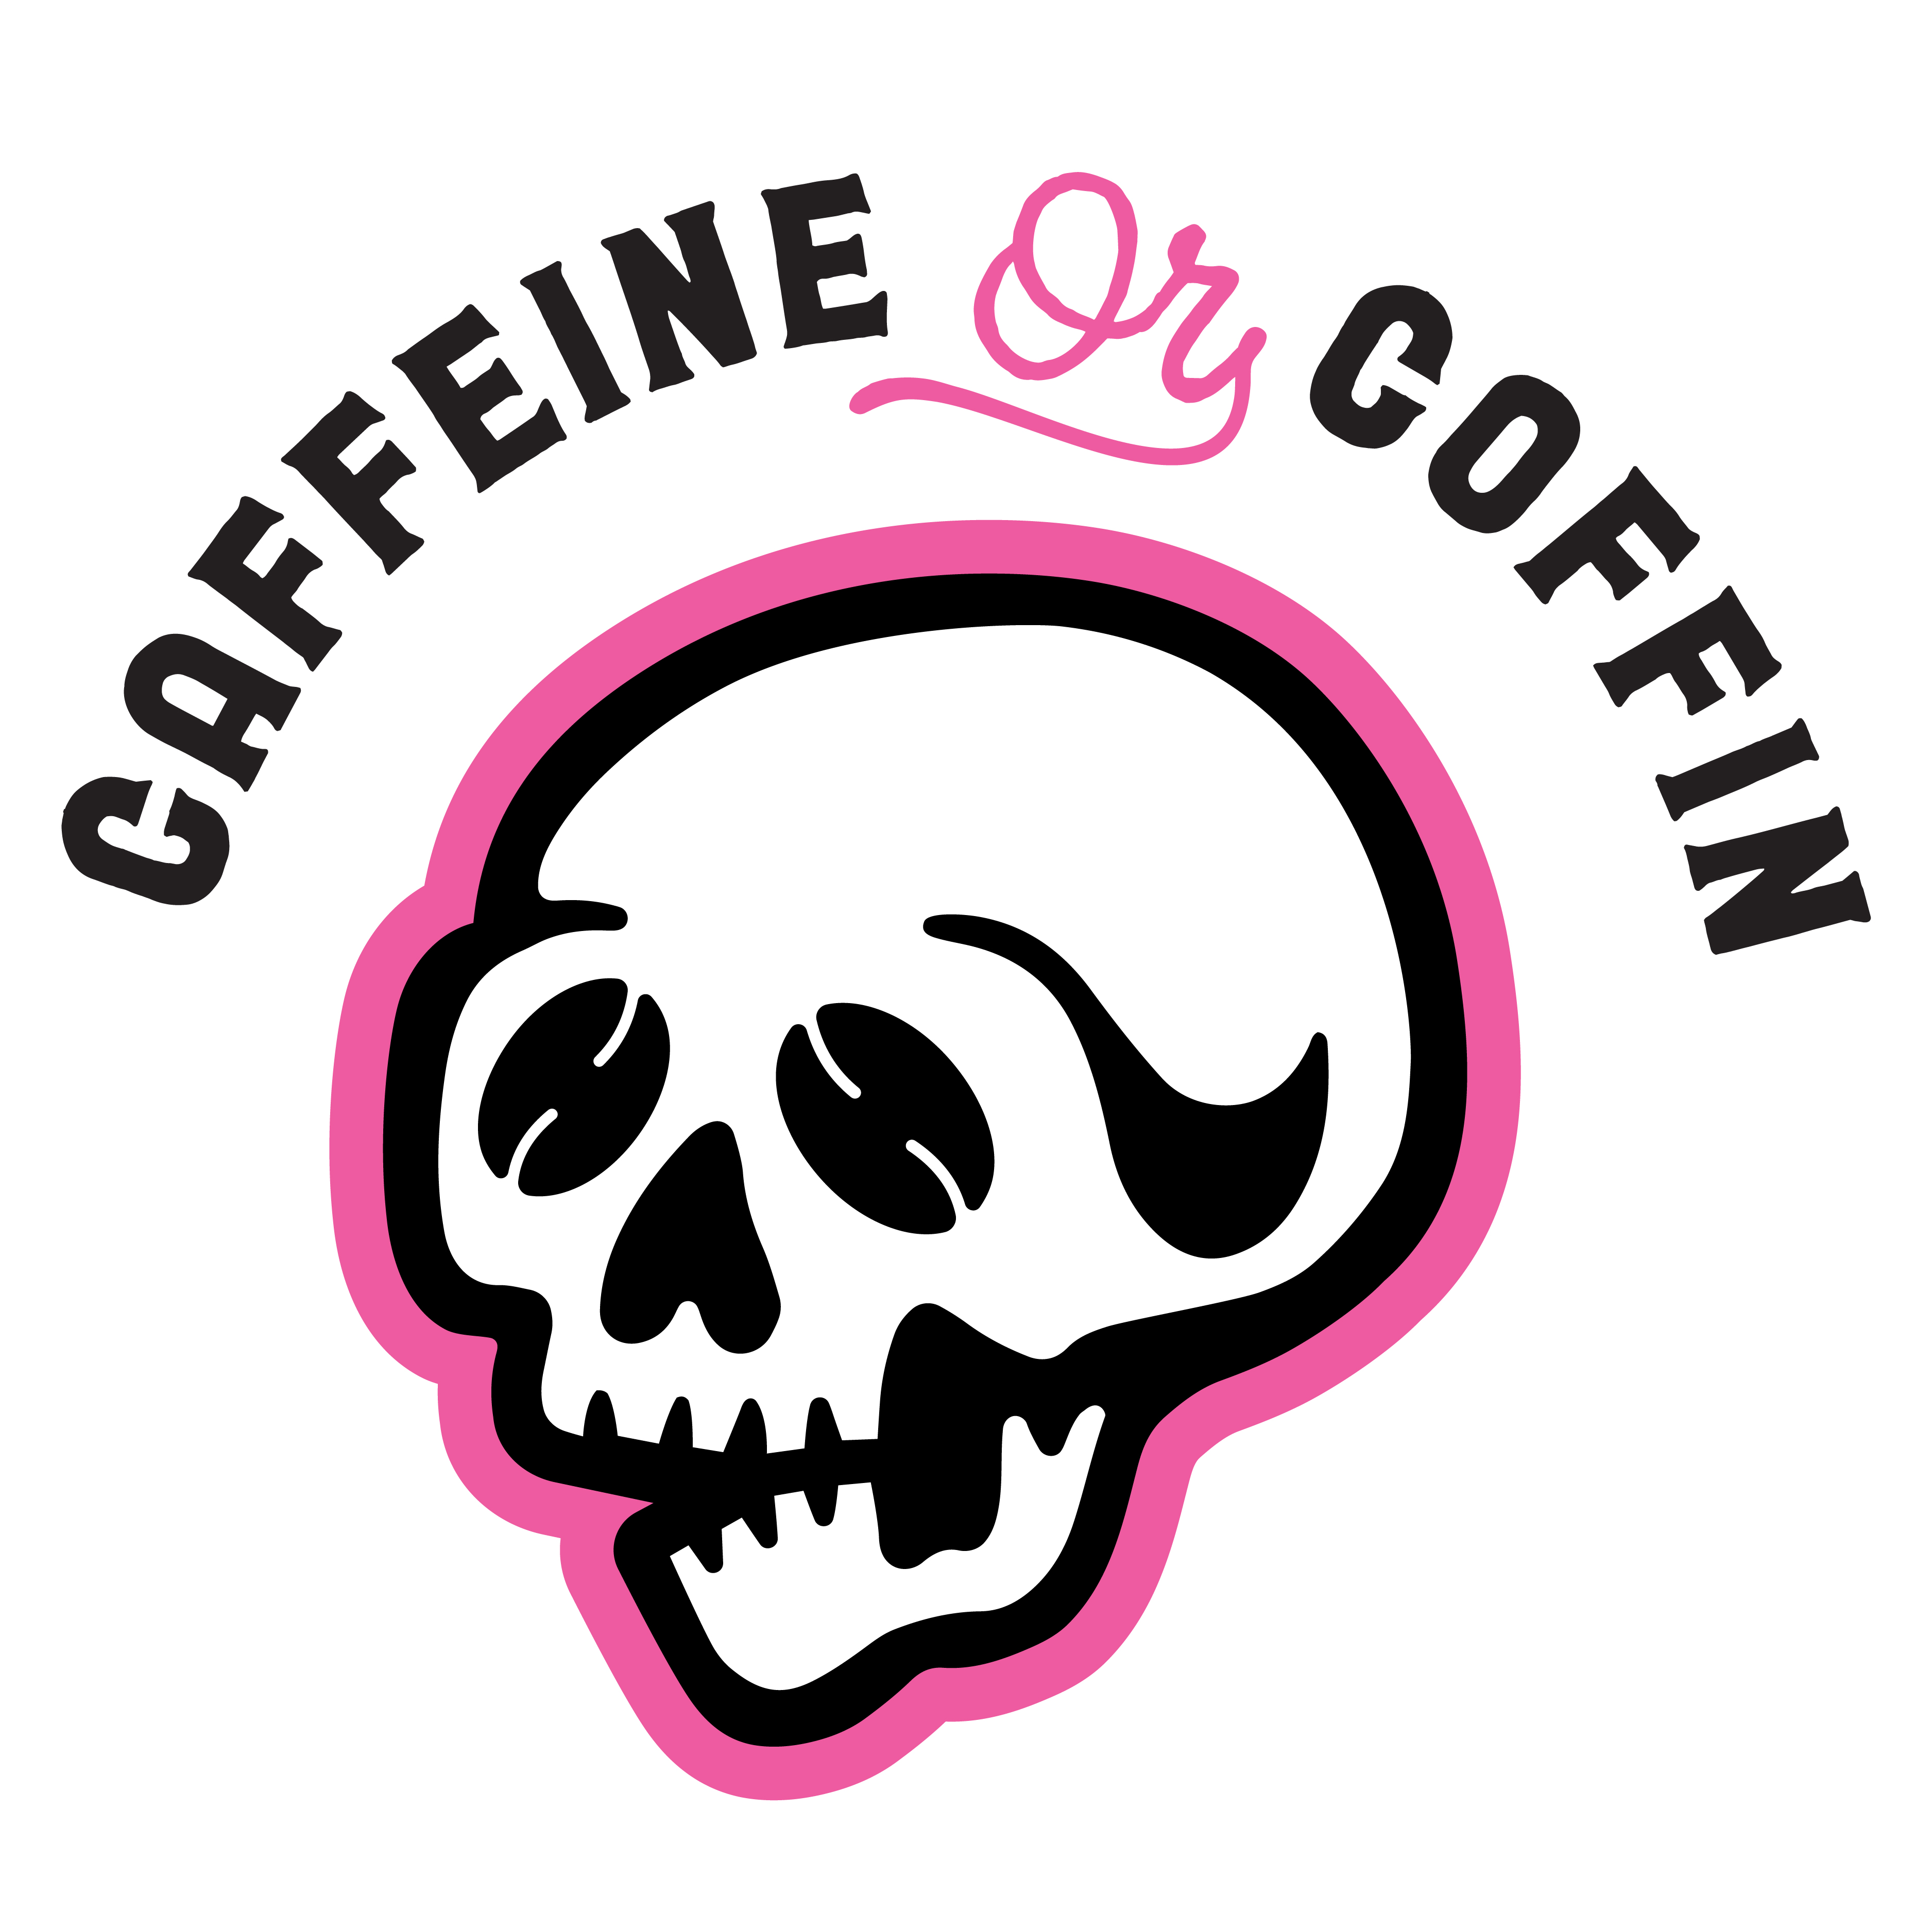 Caffeine Or Coffin Skull Logomark logo design by logo designer Stefanie Passo for your inspiration and for the worlds largest logo competition